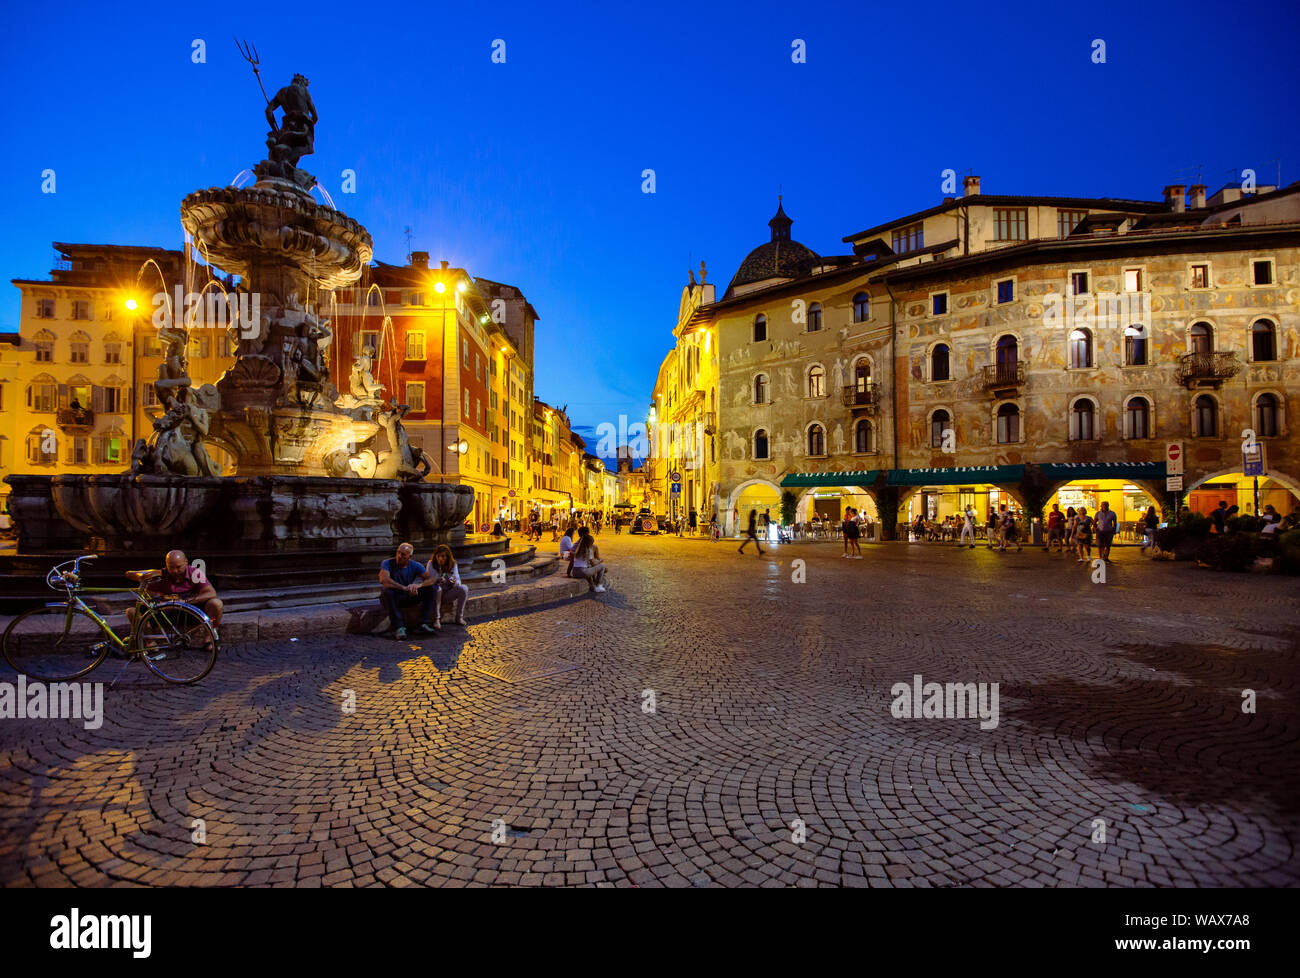 Trento (Italy) - Nightscape of San Vigilio Cathedral, a Roman Catholic cathedral in Trento, northern Italy Stock Photo